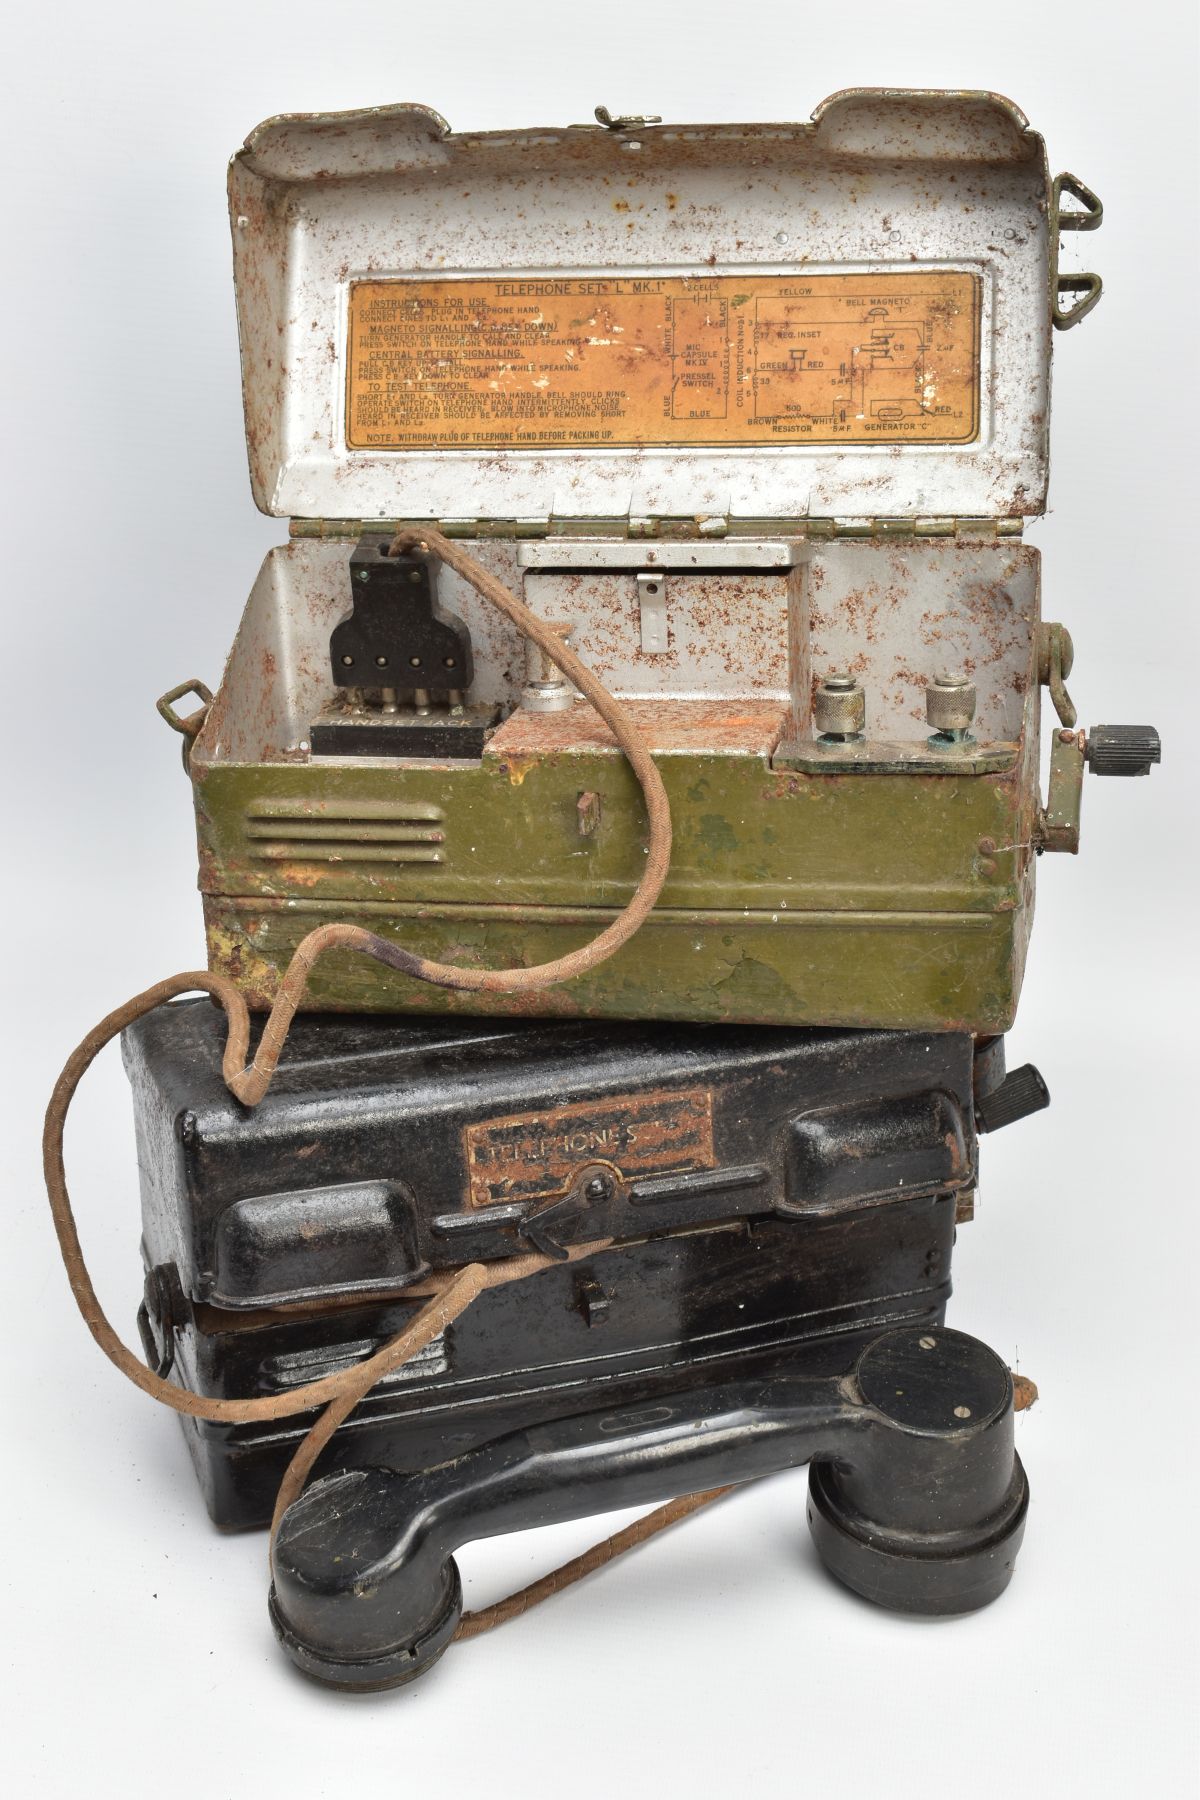 TWO MILITARY METAL BOXED TELEPHONE SETS, type L mkI, one is painted green, one may have been - Image 4 of 6